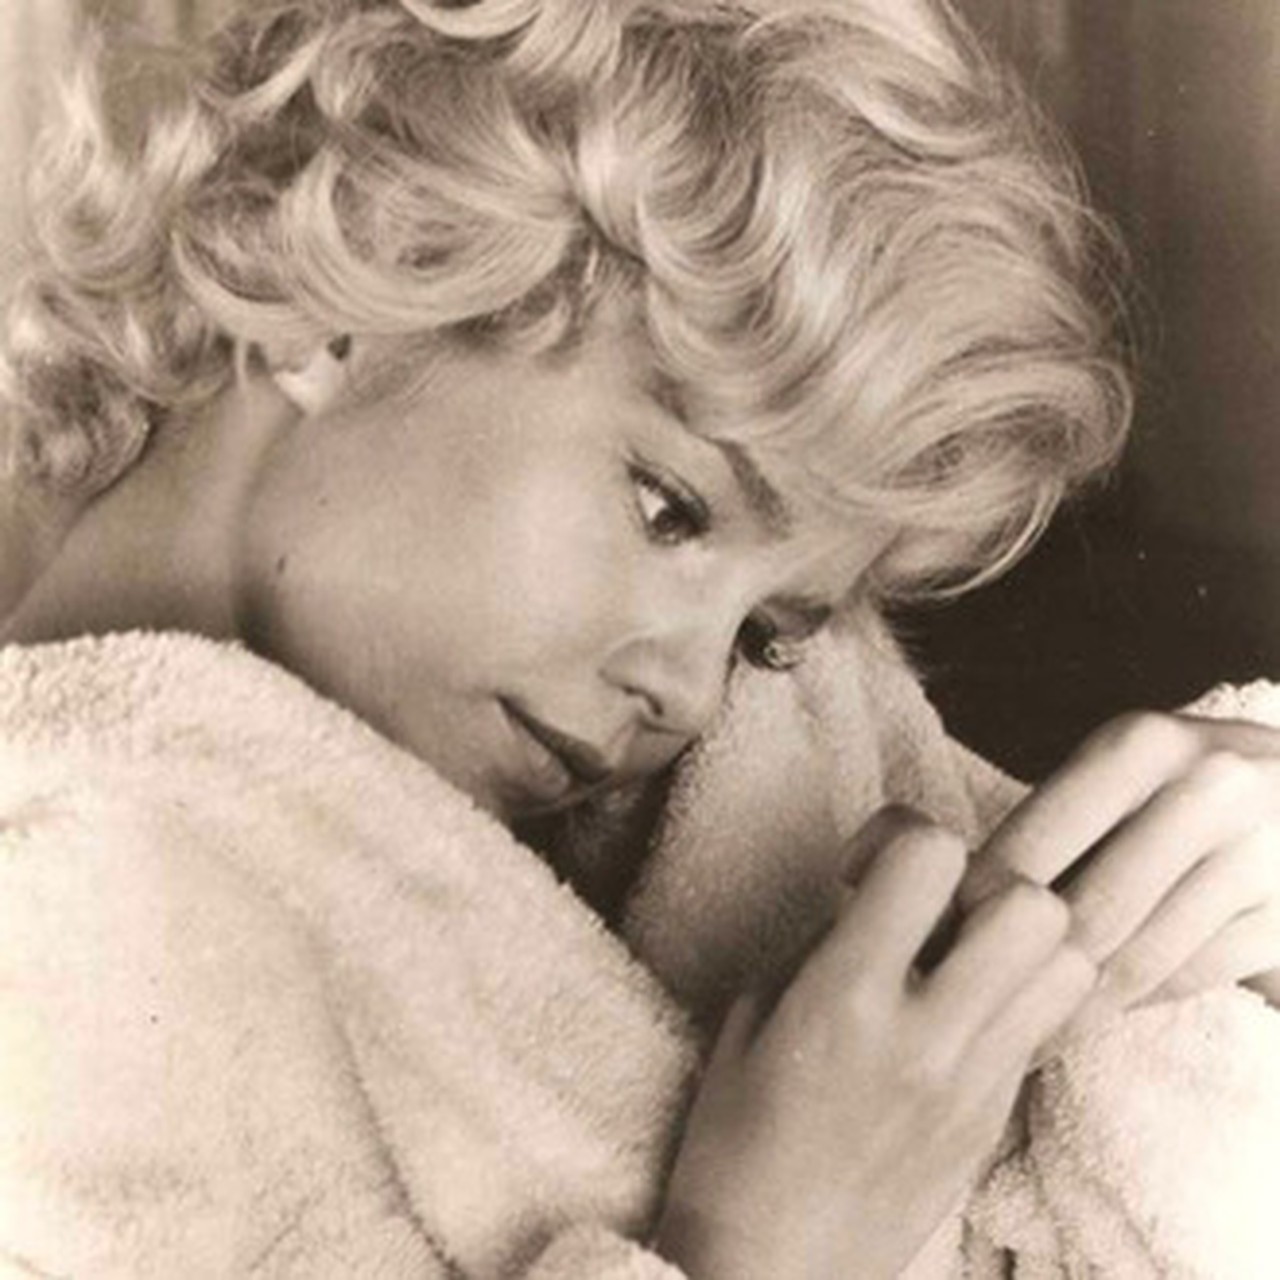 The Tuesday Weld Society